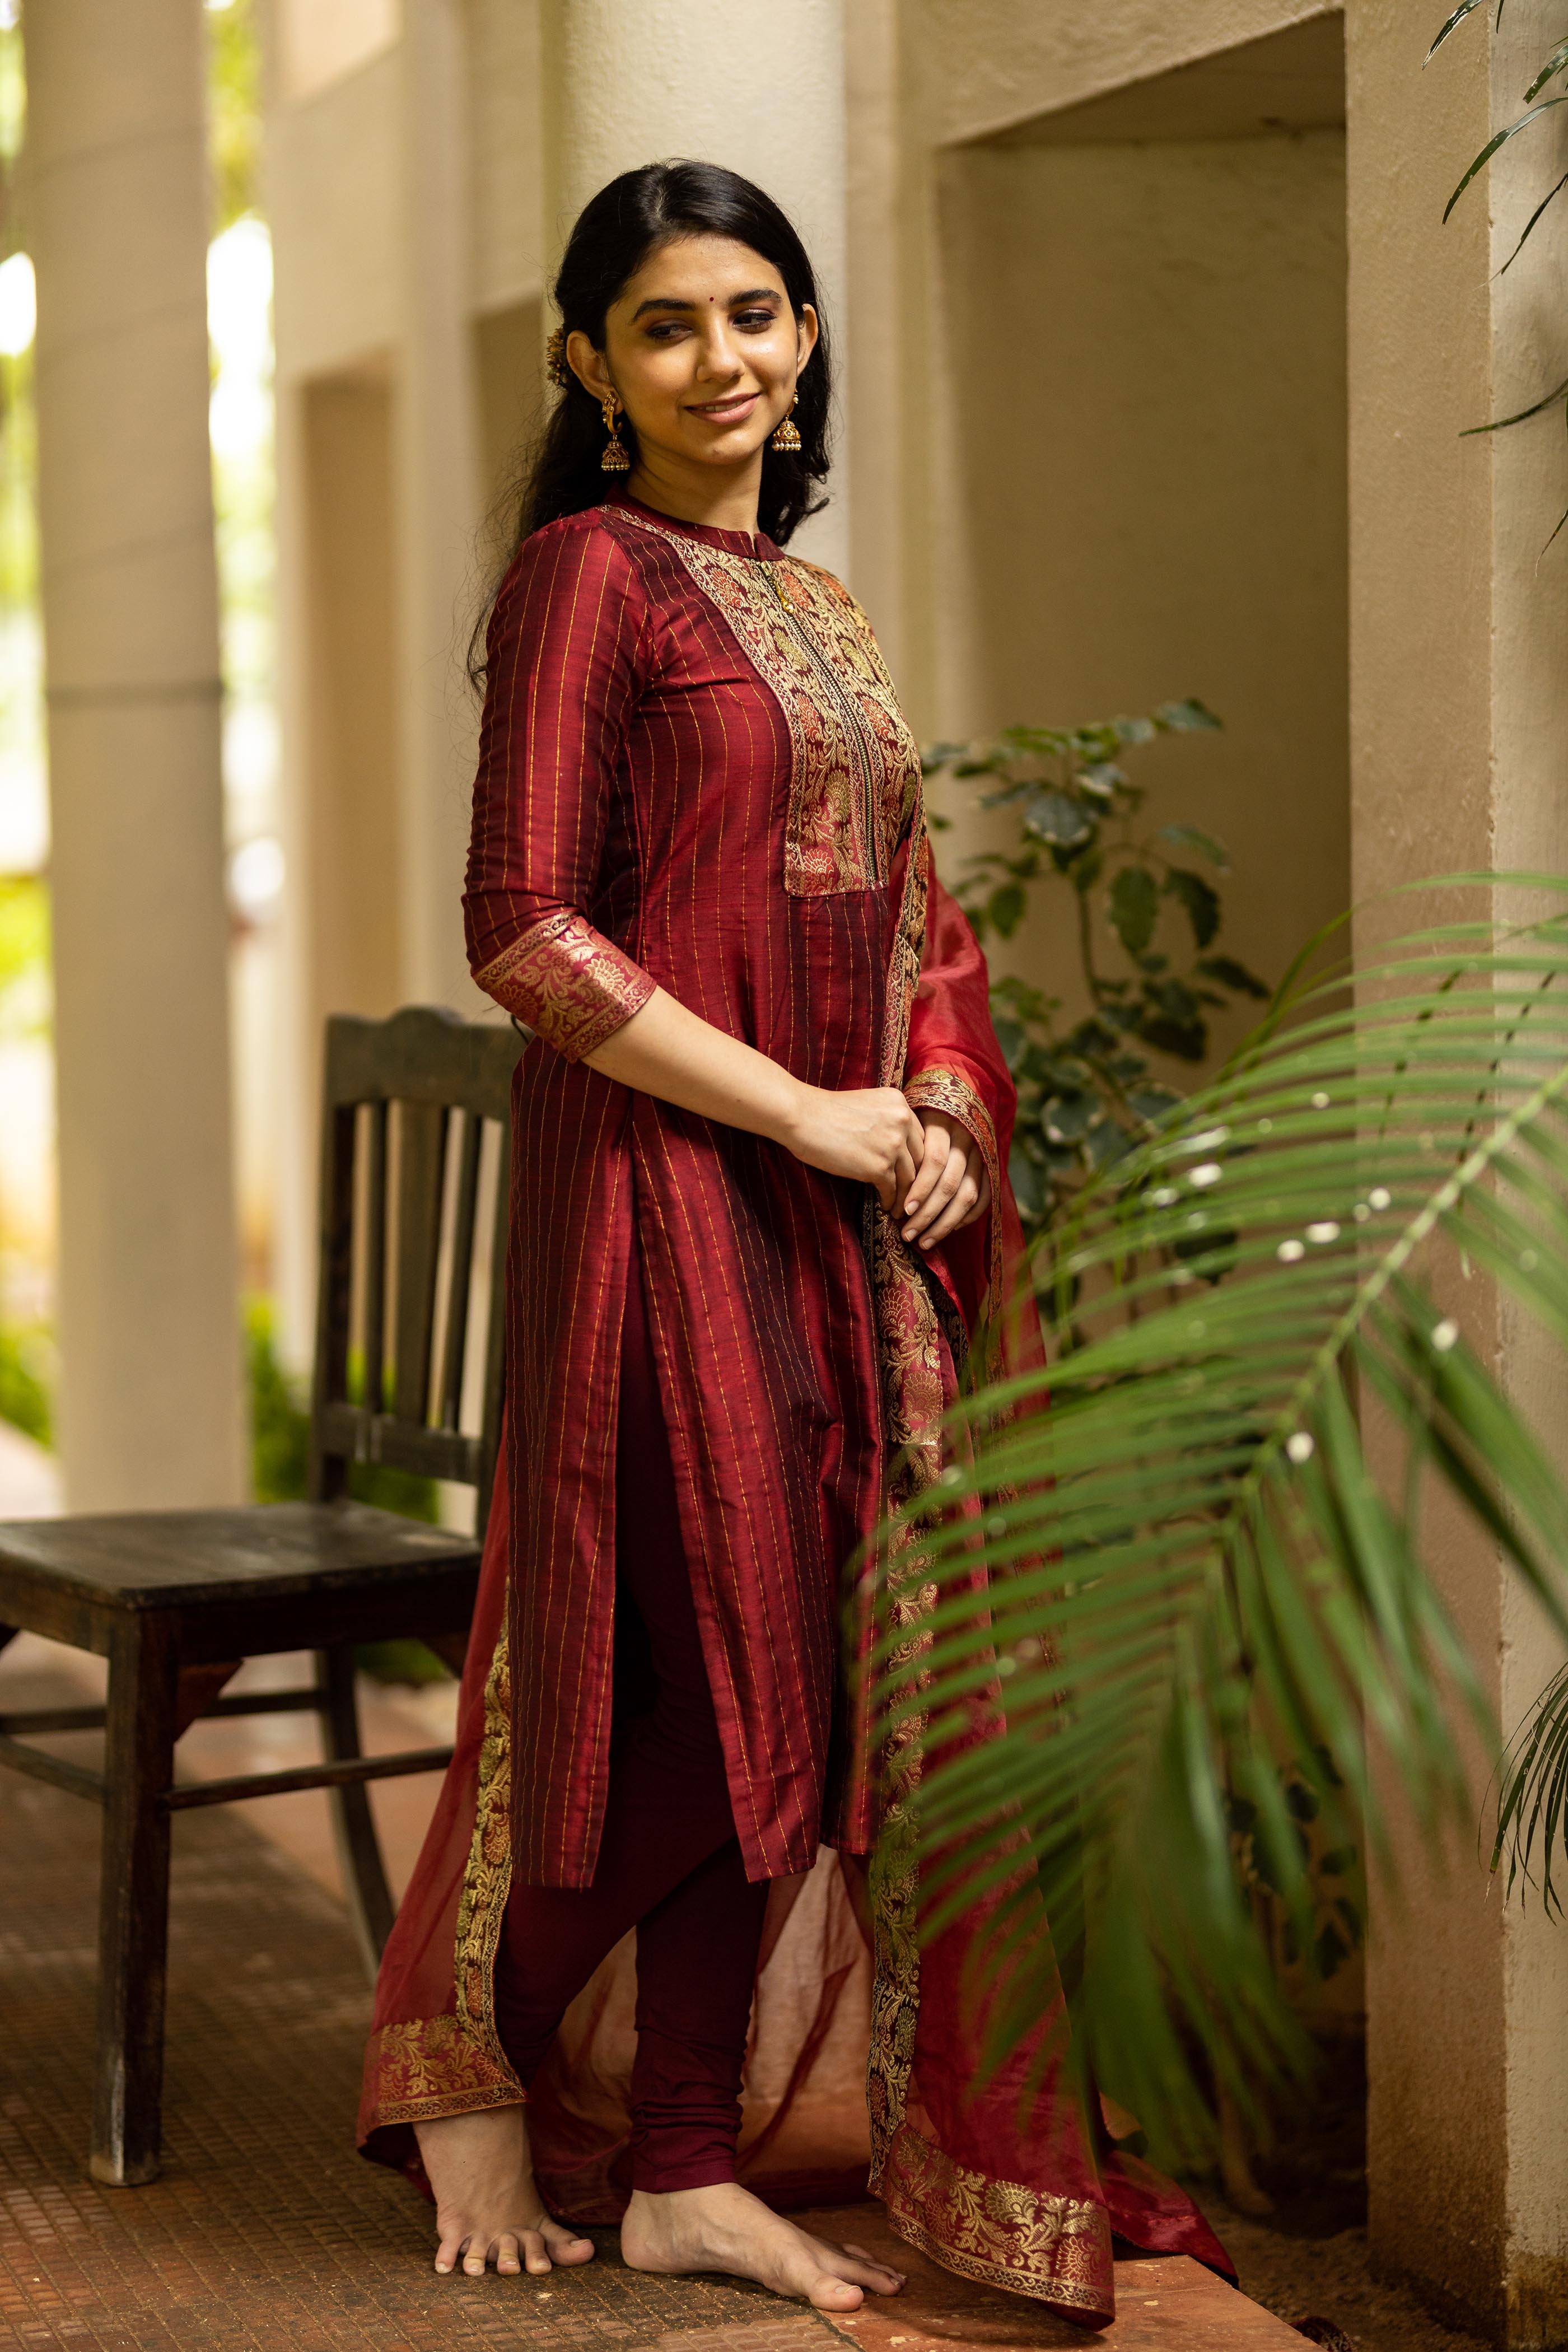 Find the perfect festive kurti for any festive occasion. From chanderi kurti with banarasi borders to collar neck kurti, long kurti with dupatta, and churidar kurta, we have the best kurta for women, including feeding friendly kurtis. Shop our new collection now!